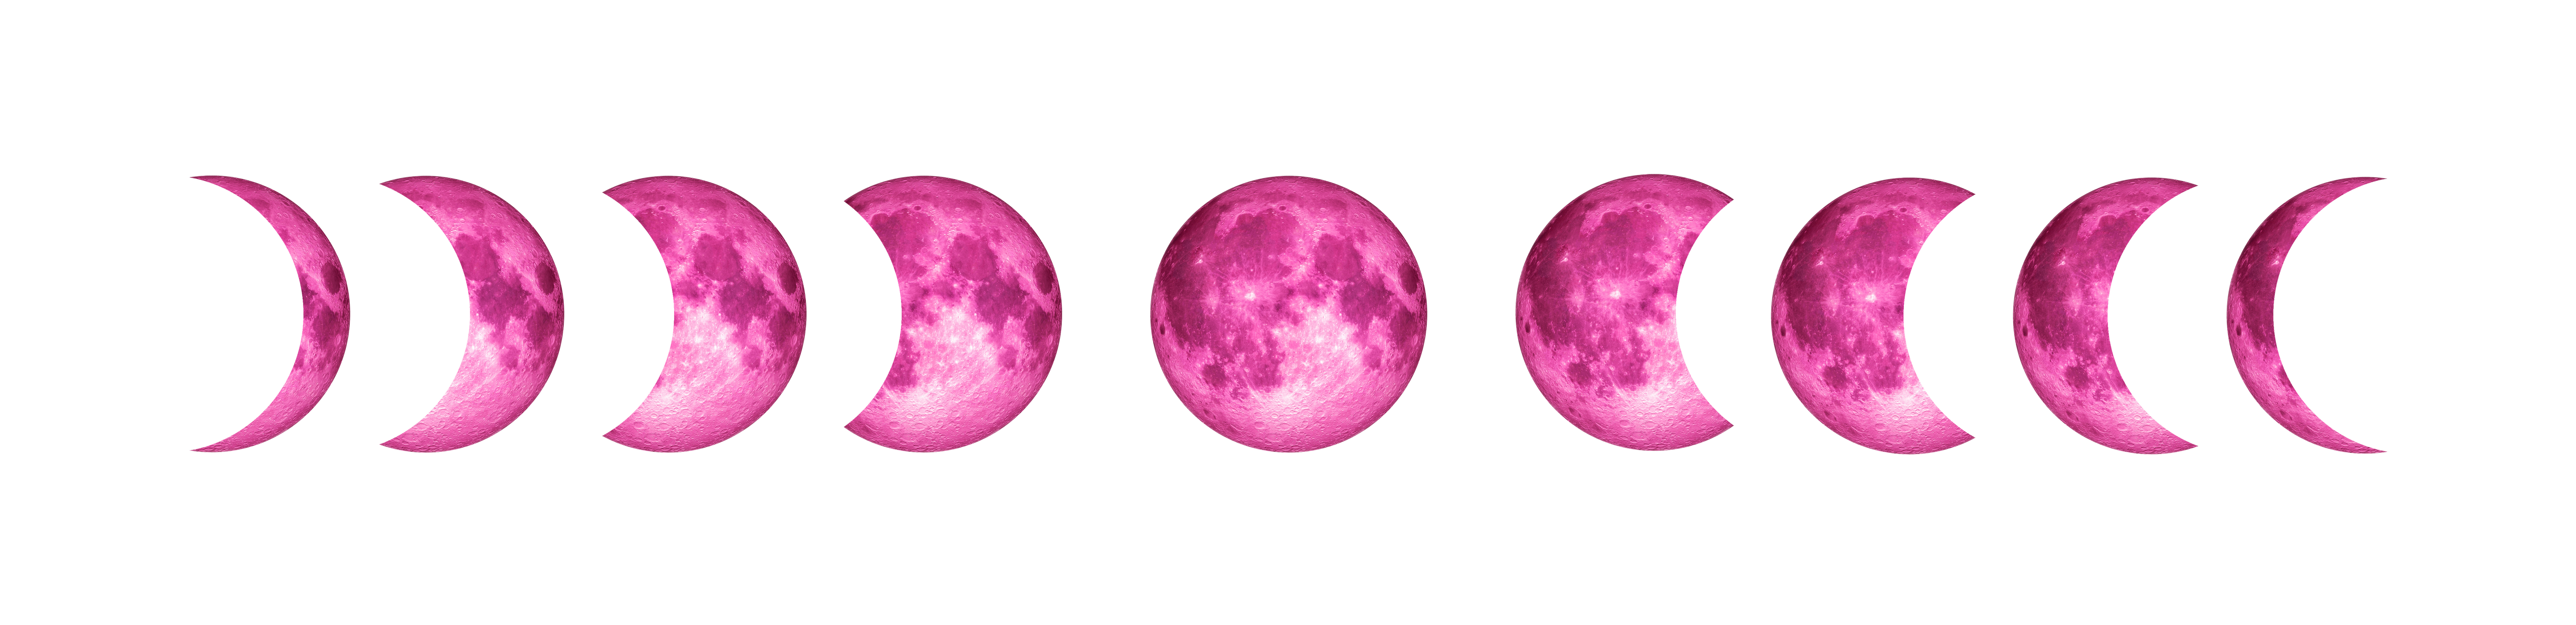 Cycle Moon Pink Phasesisolated With Clipping Path On White Background